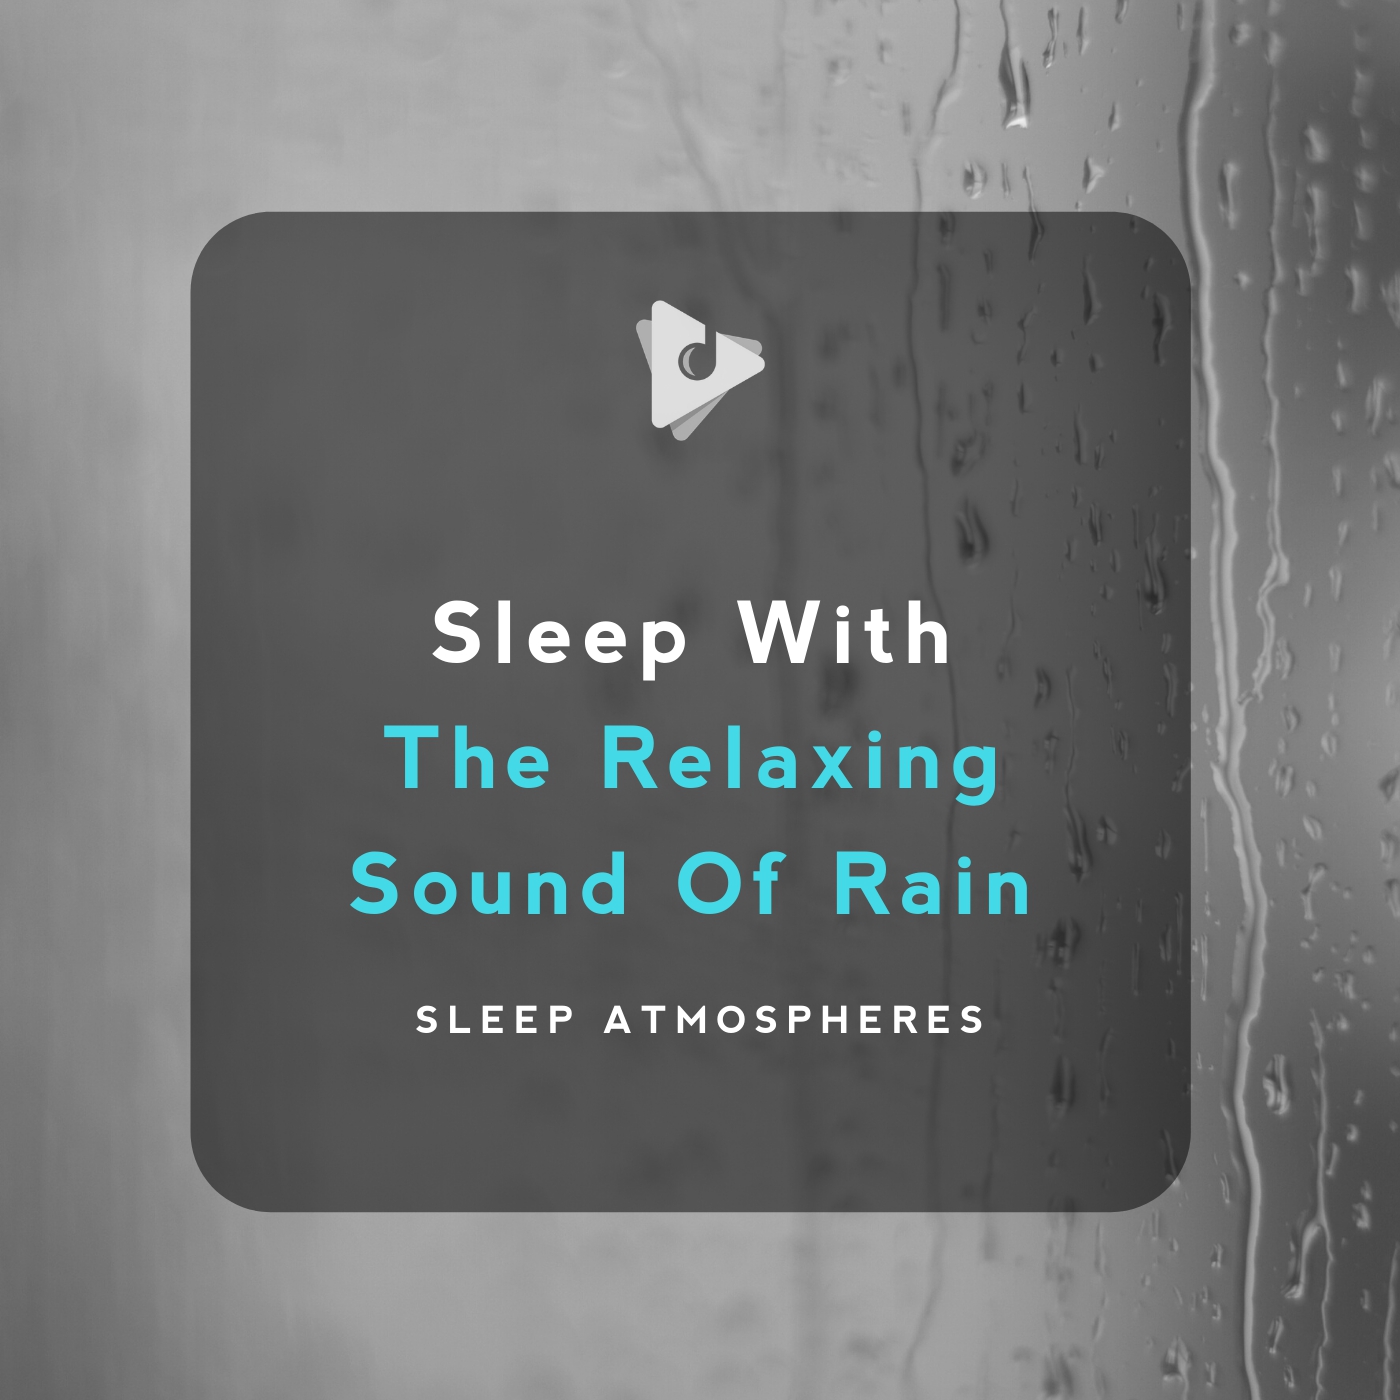 Sleep With The Relaxing Sound Of Rain